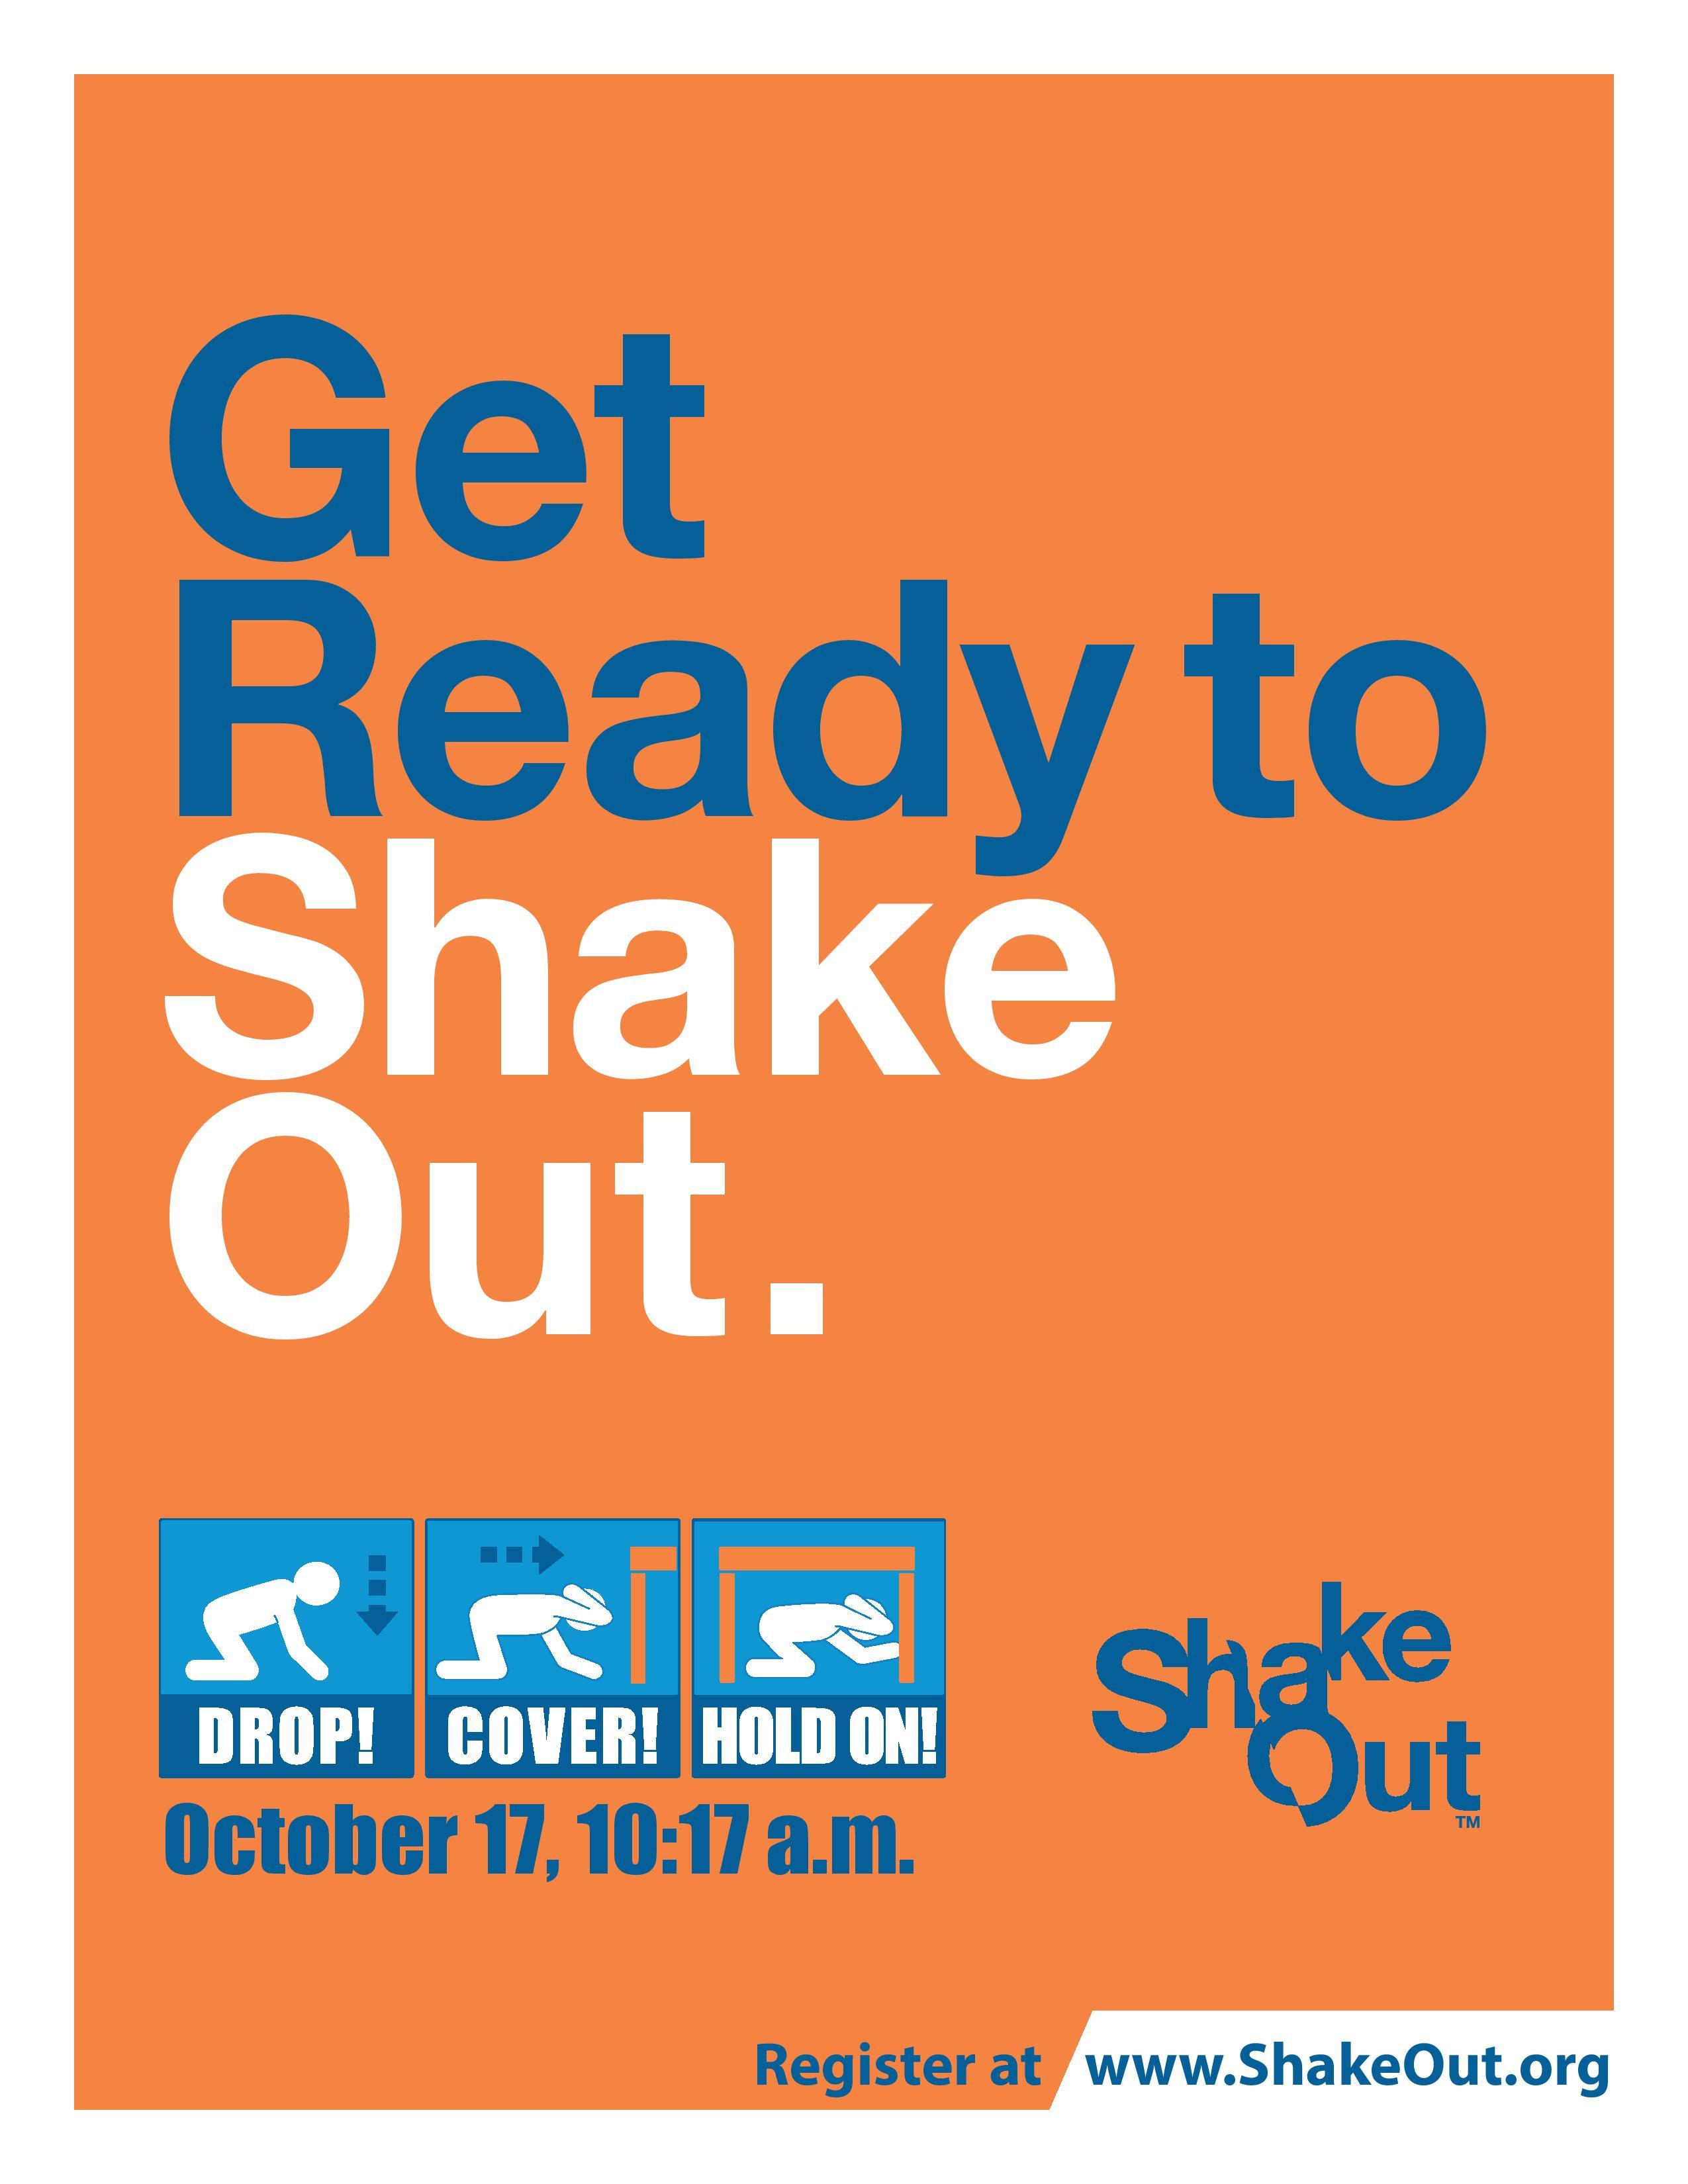 Great Shakeout flyer